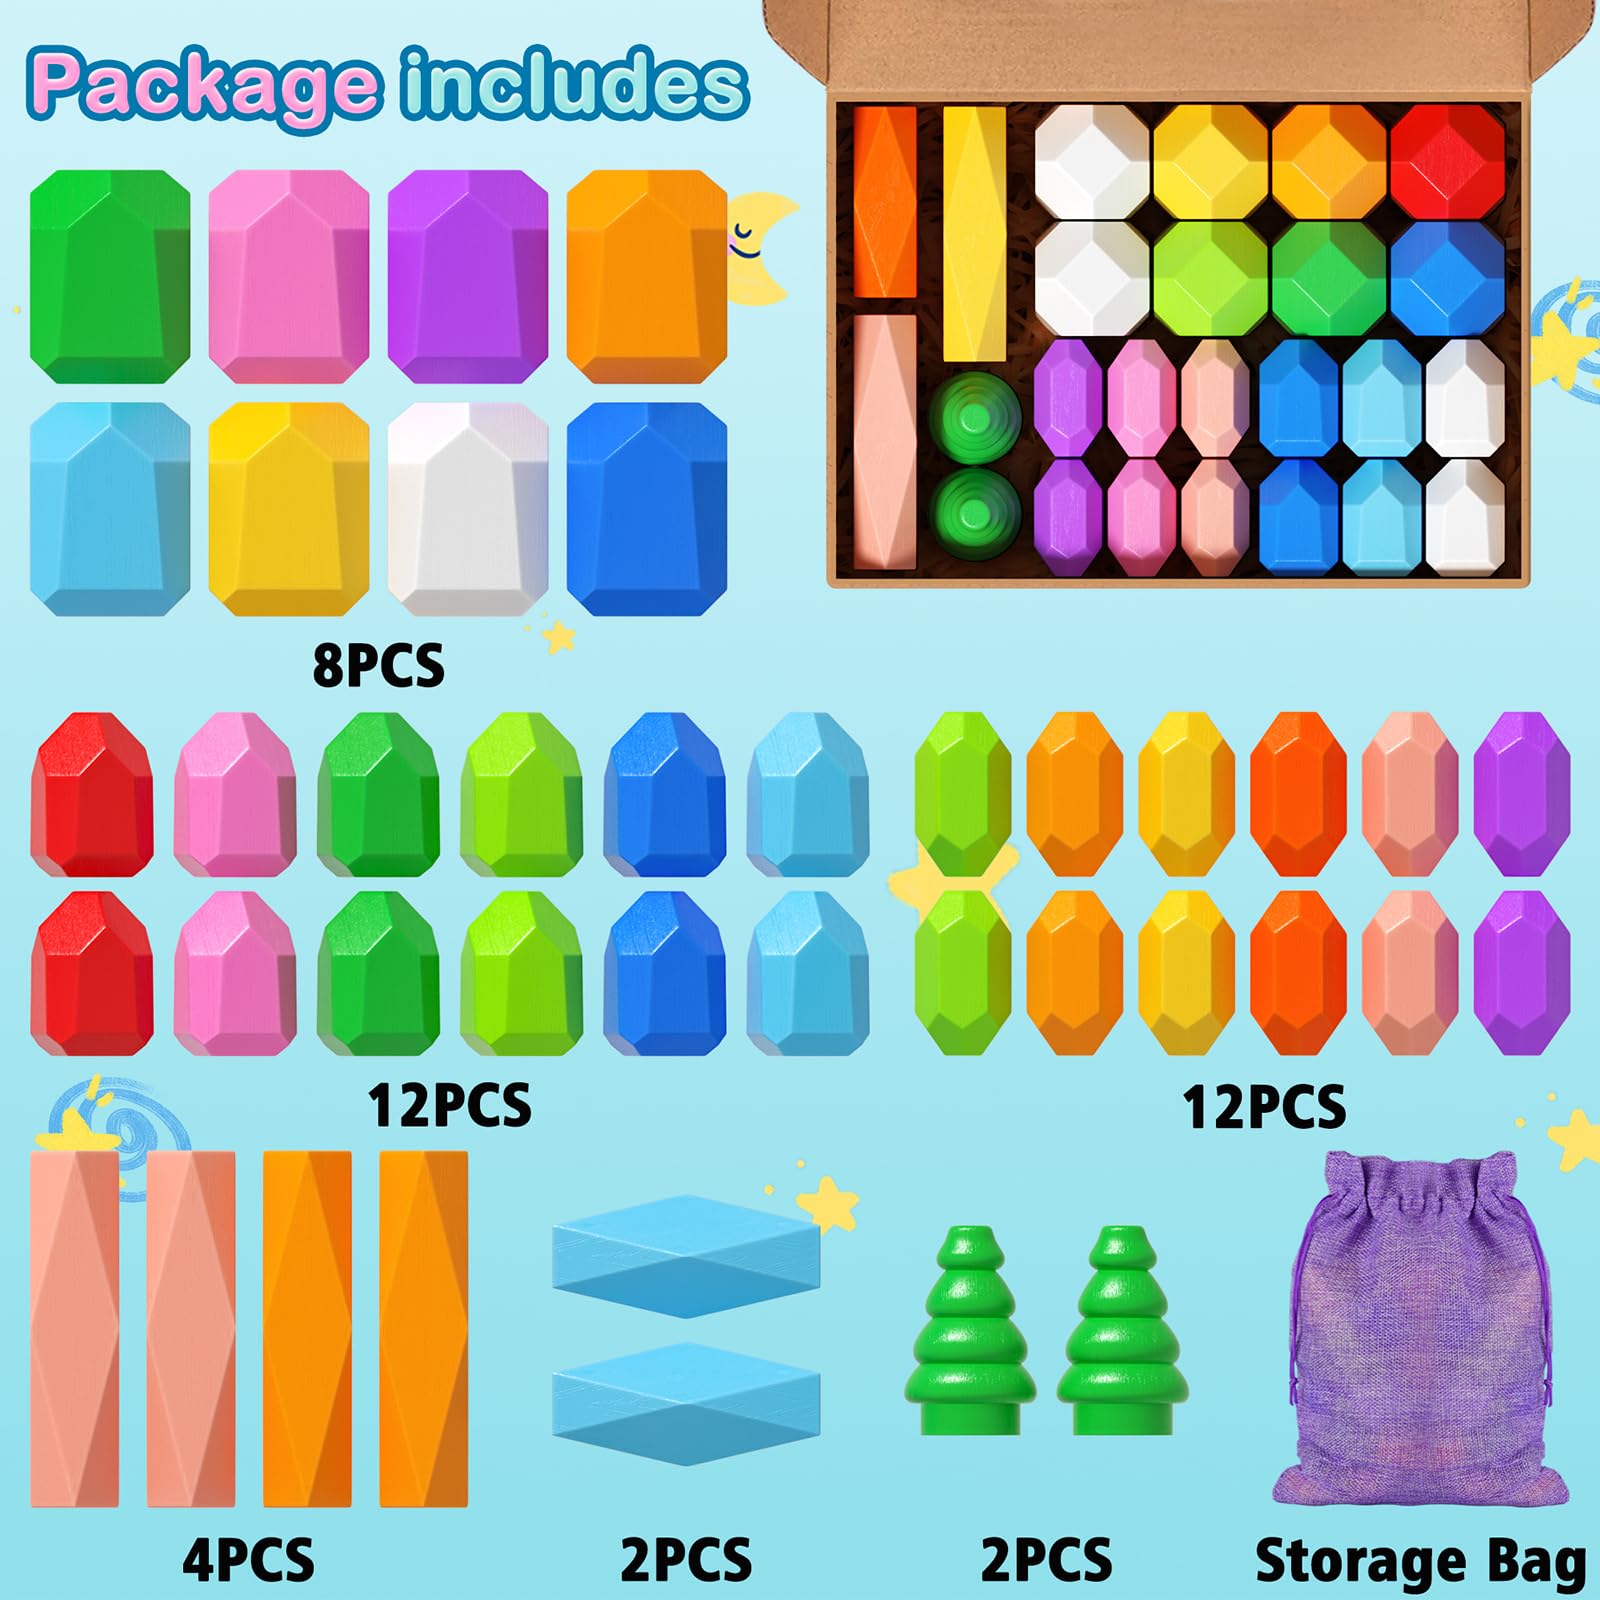 40PCS Wooden Stacking Rocks Toys, Montessori Toys for 1 2 3 year old, Stacking toys for Toddlers, Sensory STEM Preschool Learning Building Blocks Toys for Kids age 3-5, Kids Games Gifts for Boys Girls